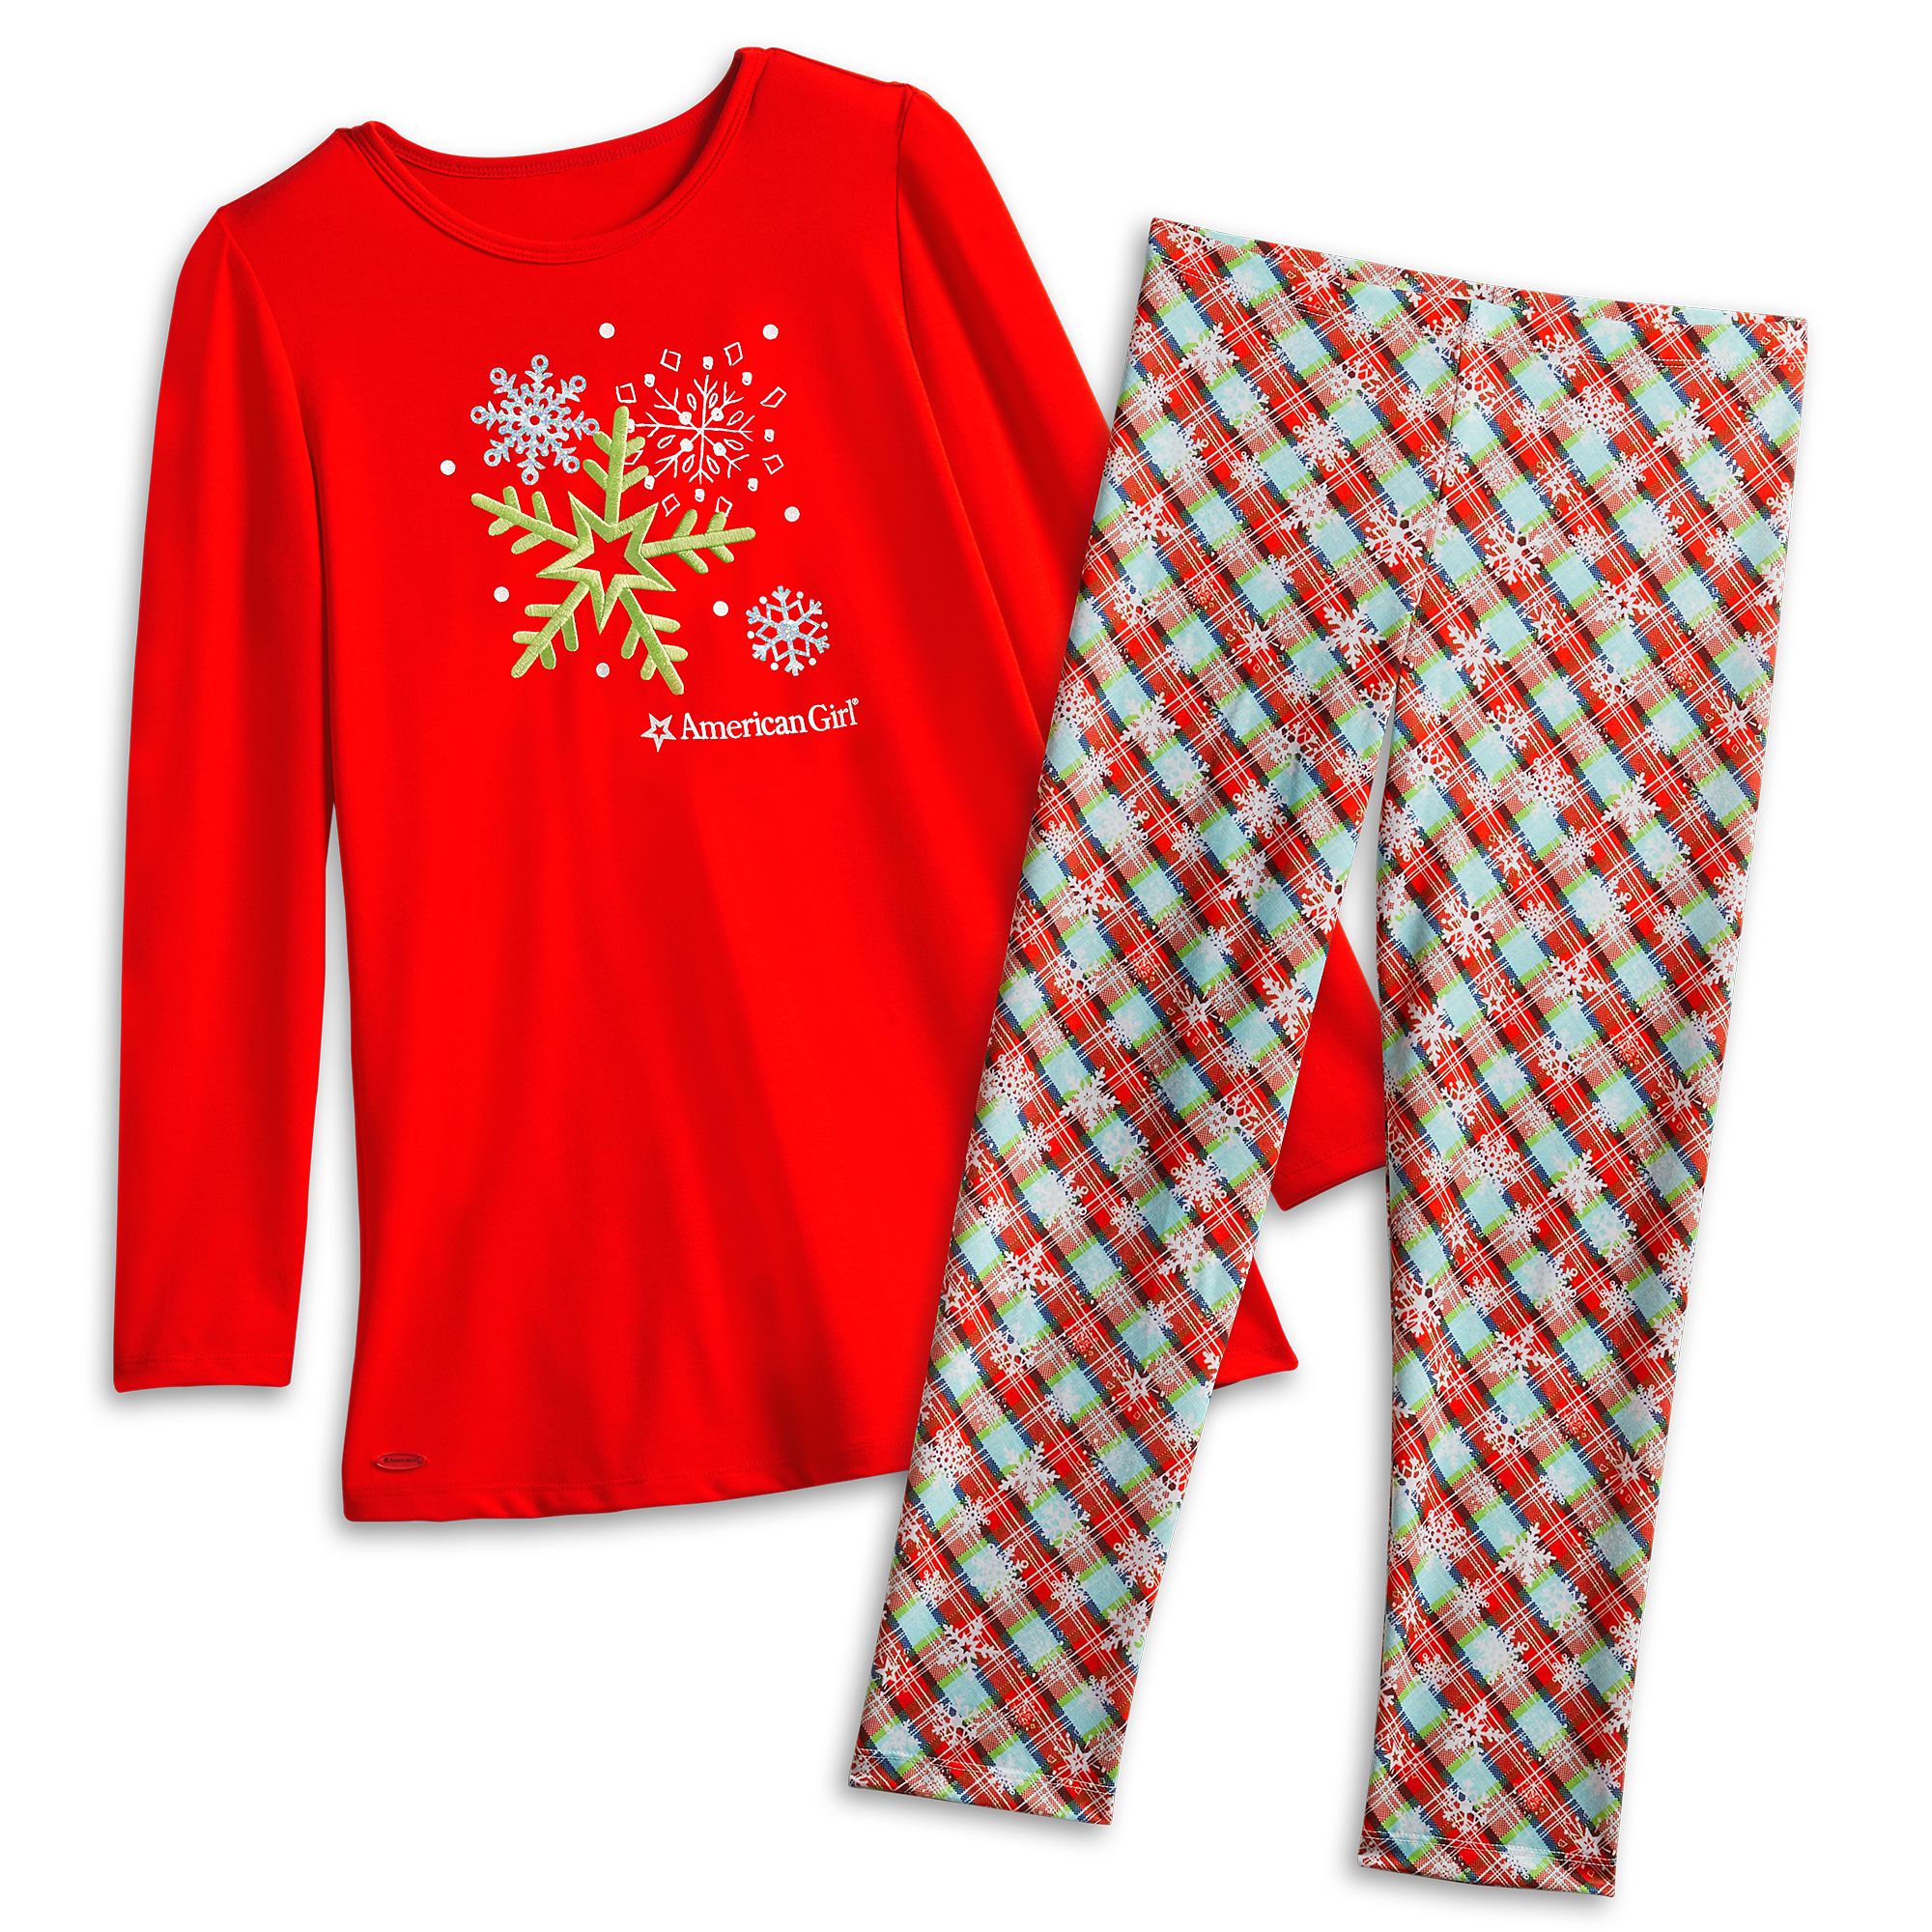 Hairbands NEW American Girl Holiday Dreams Pajama PJ Outfit Set w/ Slippers 